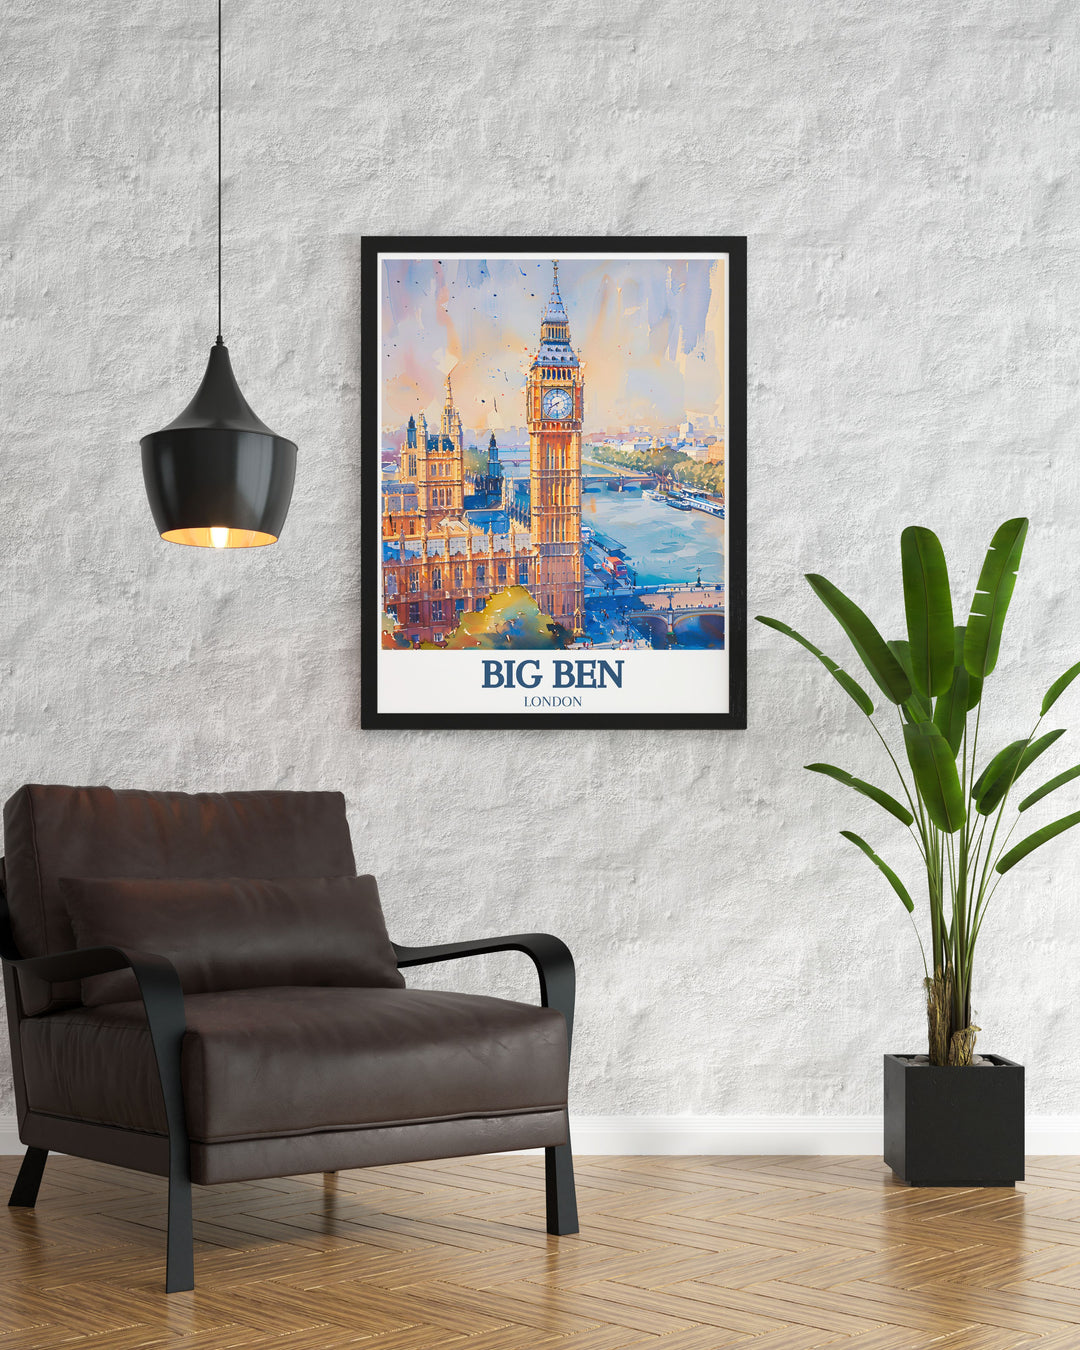 Vibrant art print of London, highlighting the blend of historic beauty and scenic landscapes with Big Ben, the Houses of Parliament, and the River Thames in the background. Ideal for adding a touch of Londons charm to your decor.